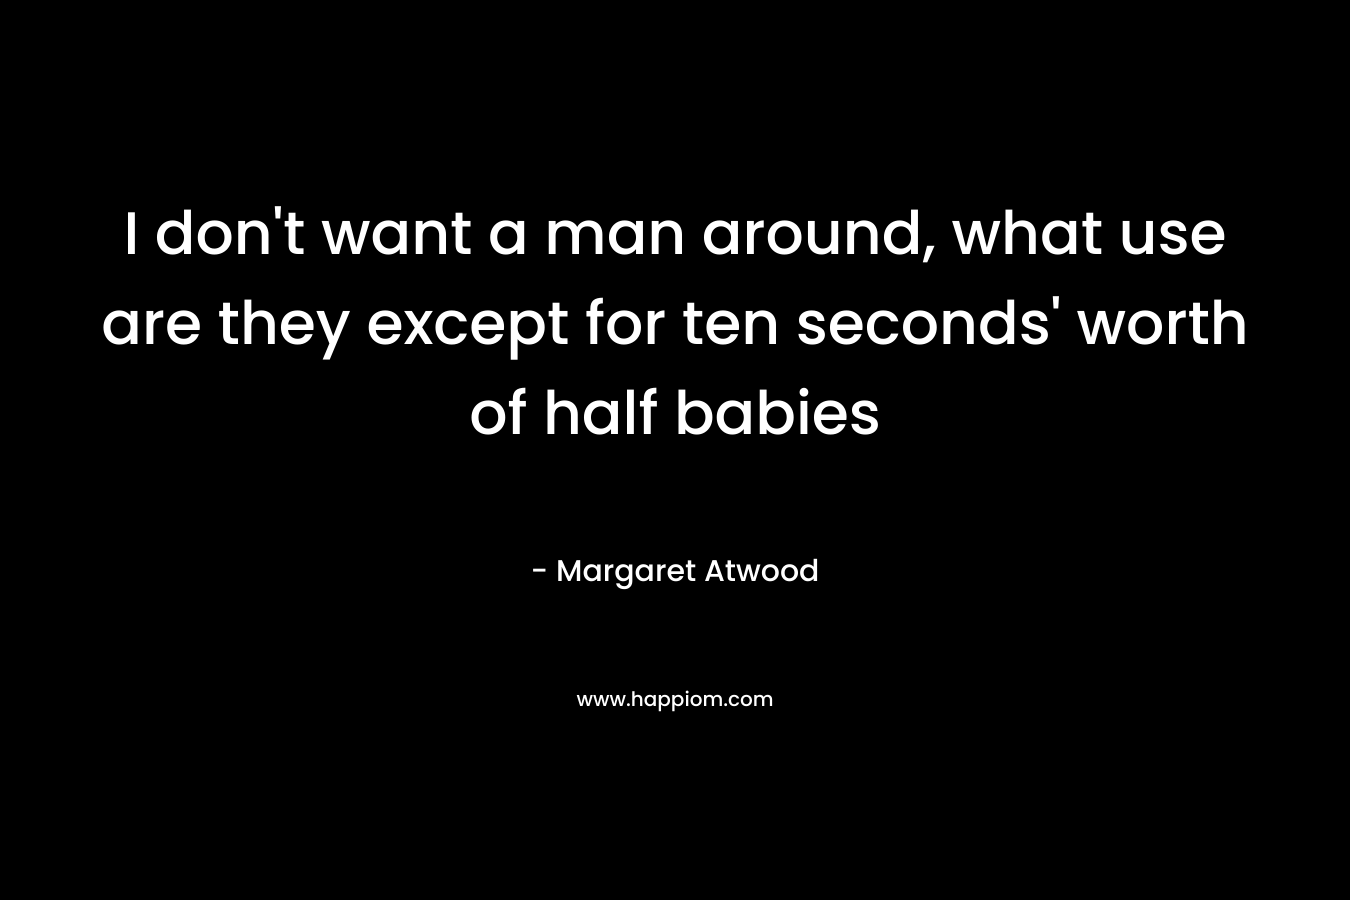 I don't want a man around, what use are they except for ten seconds' worth of half babies